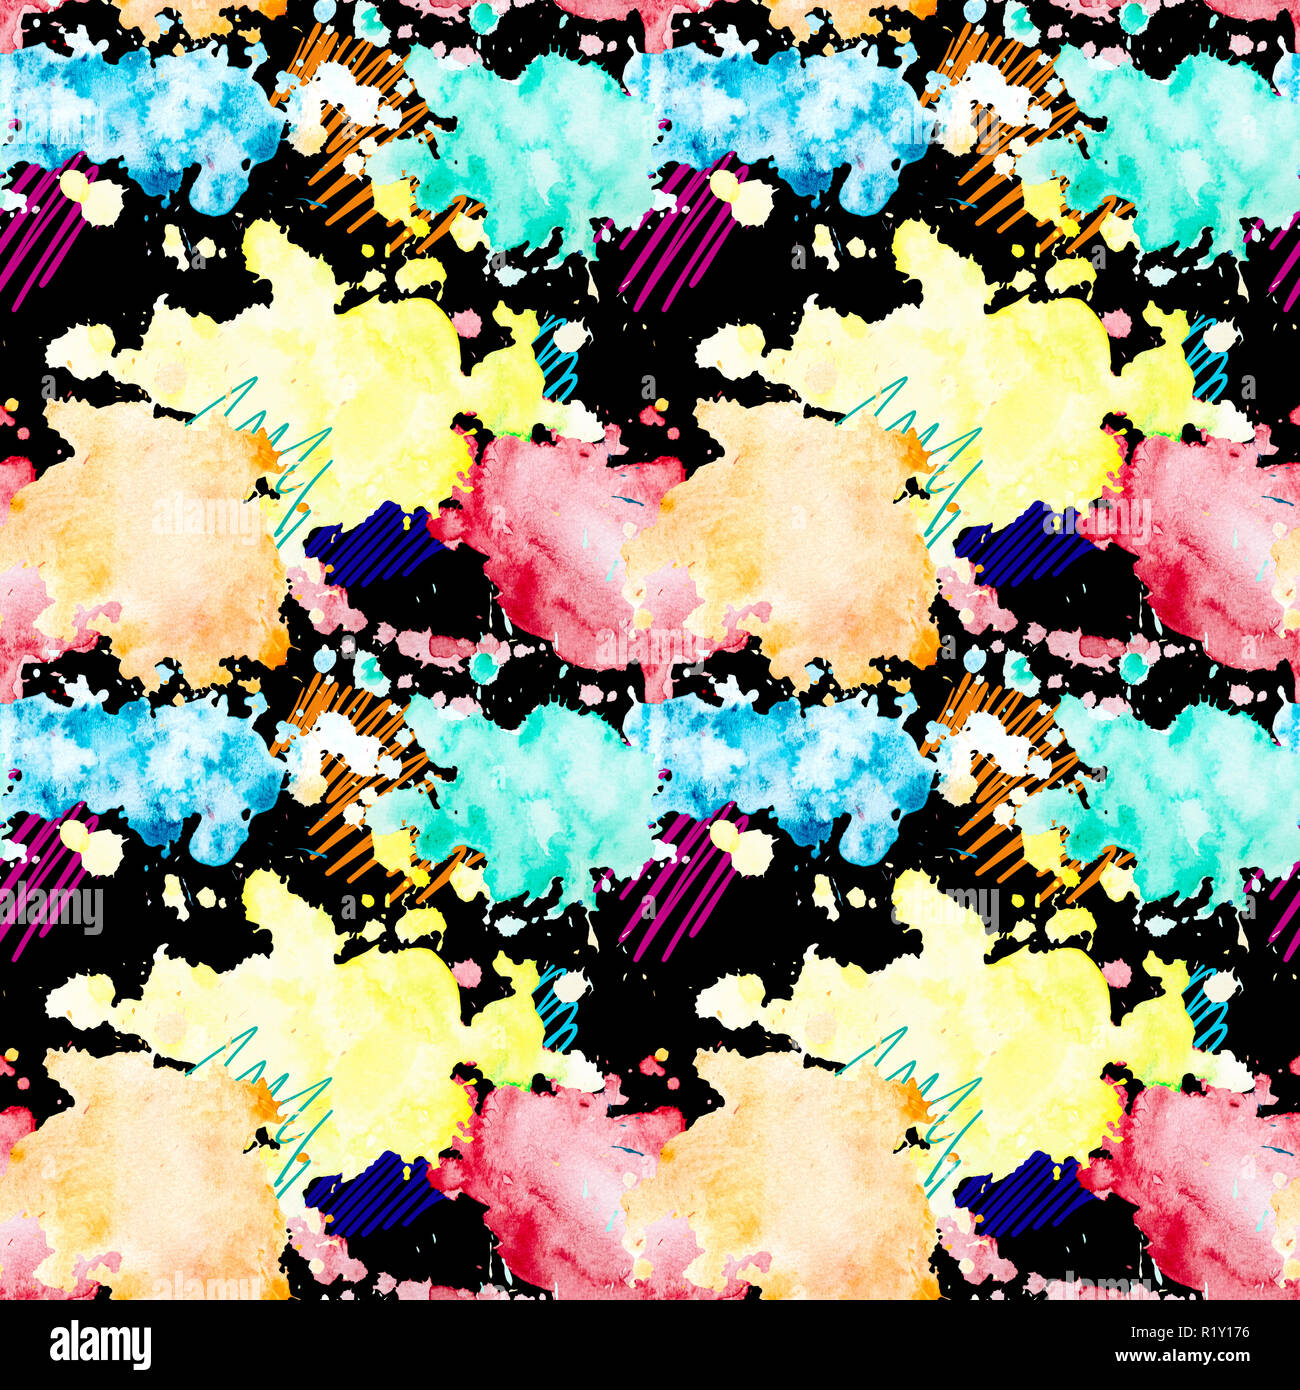 Watercolor splashes. Colorful bright seamless pattern with yellow, orange, red and blue blots on a black background. Stock Photo